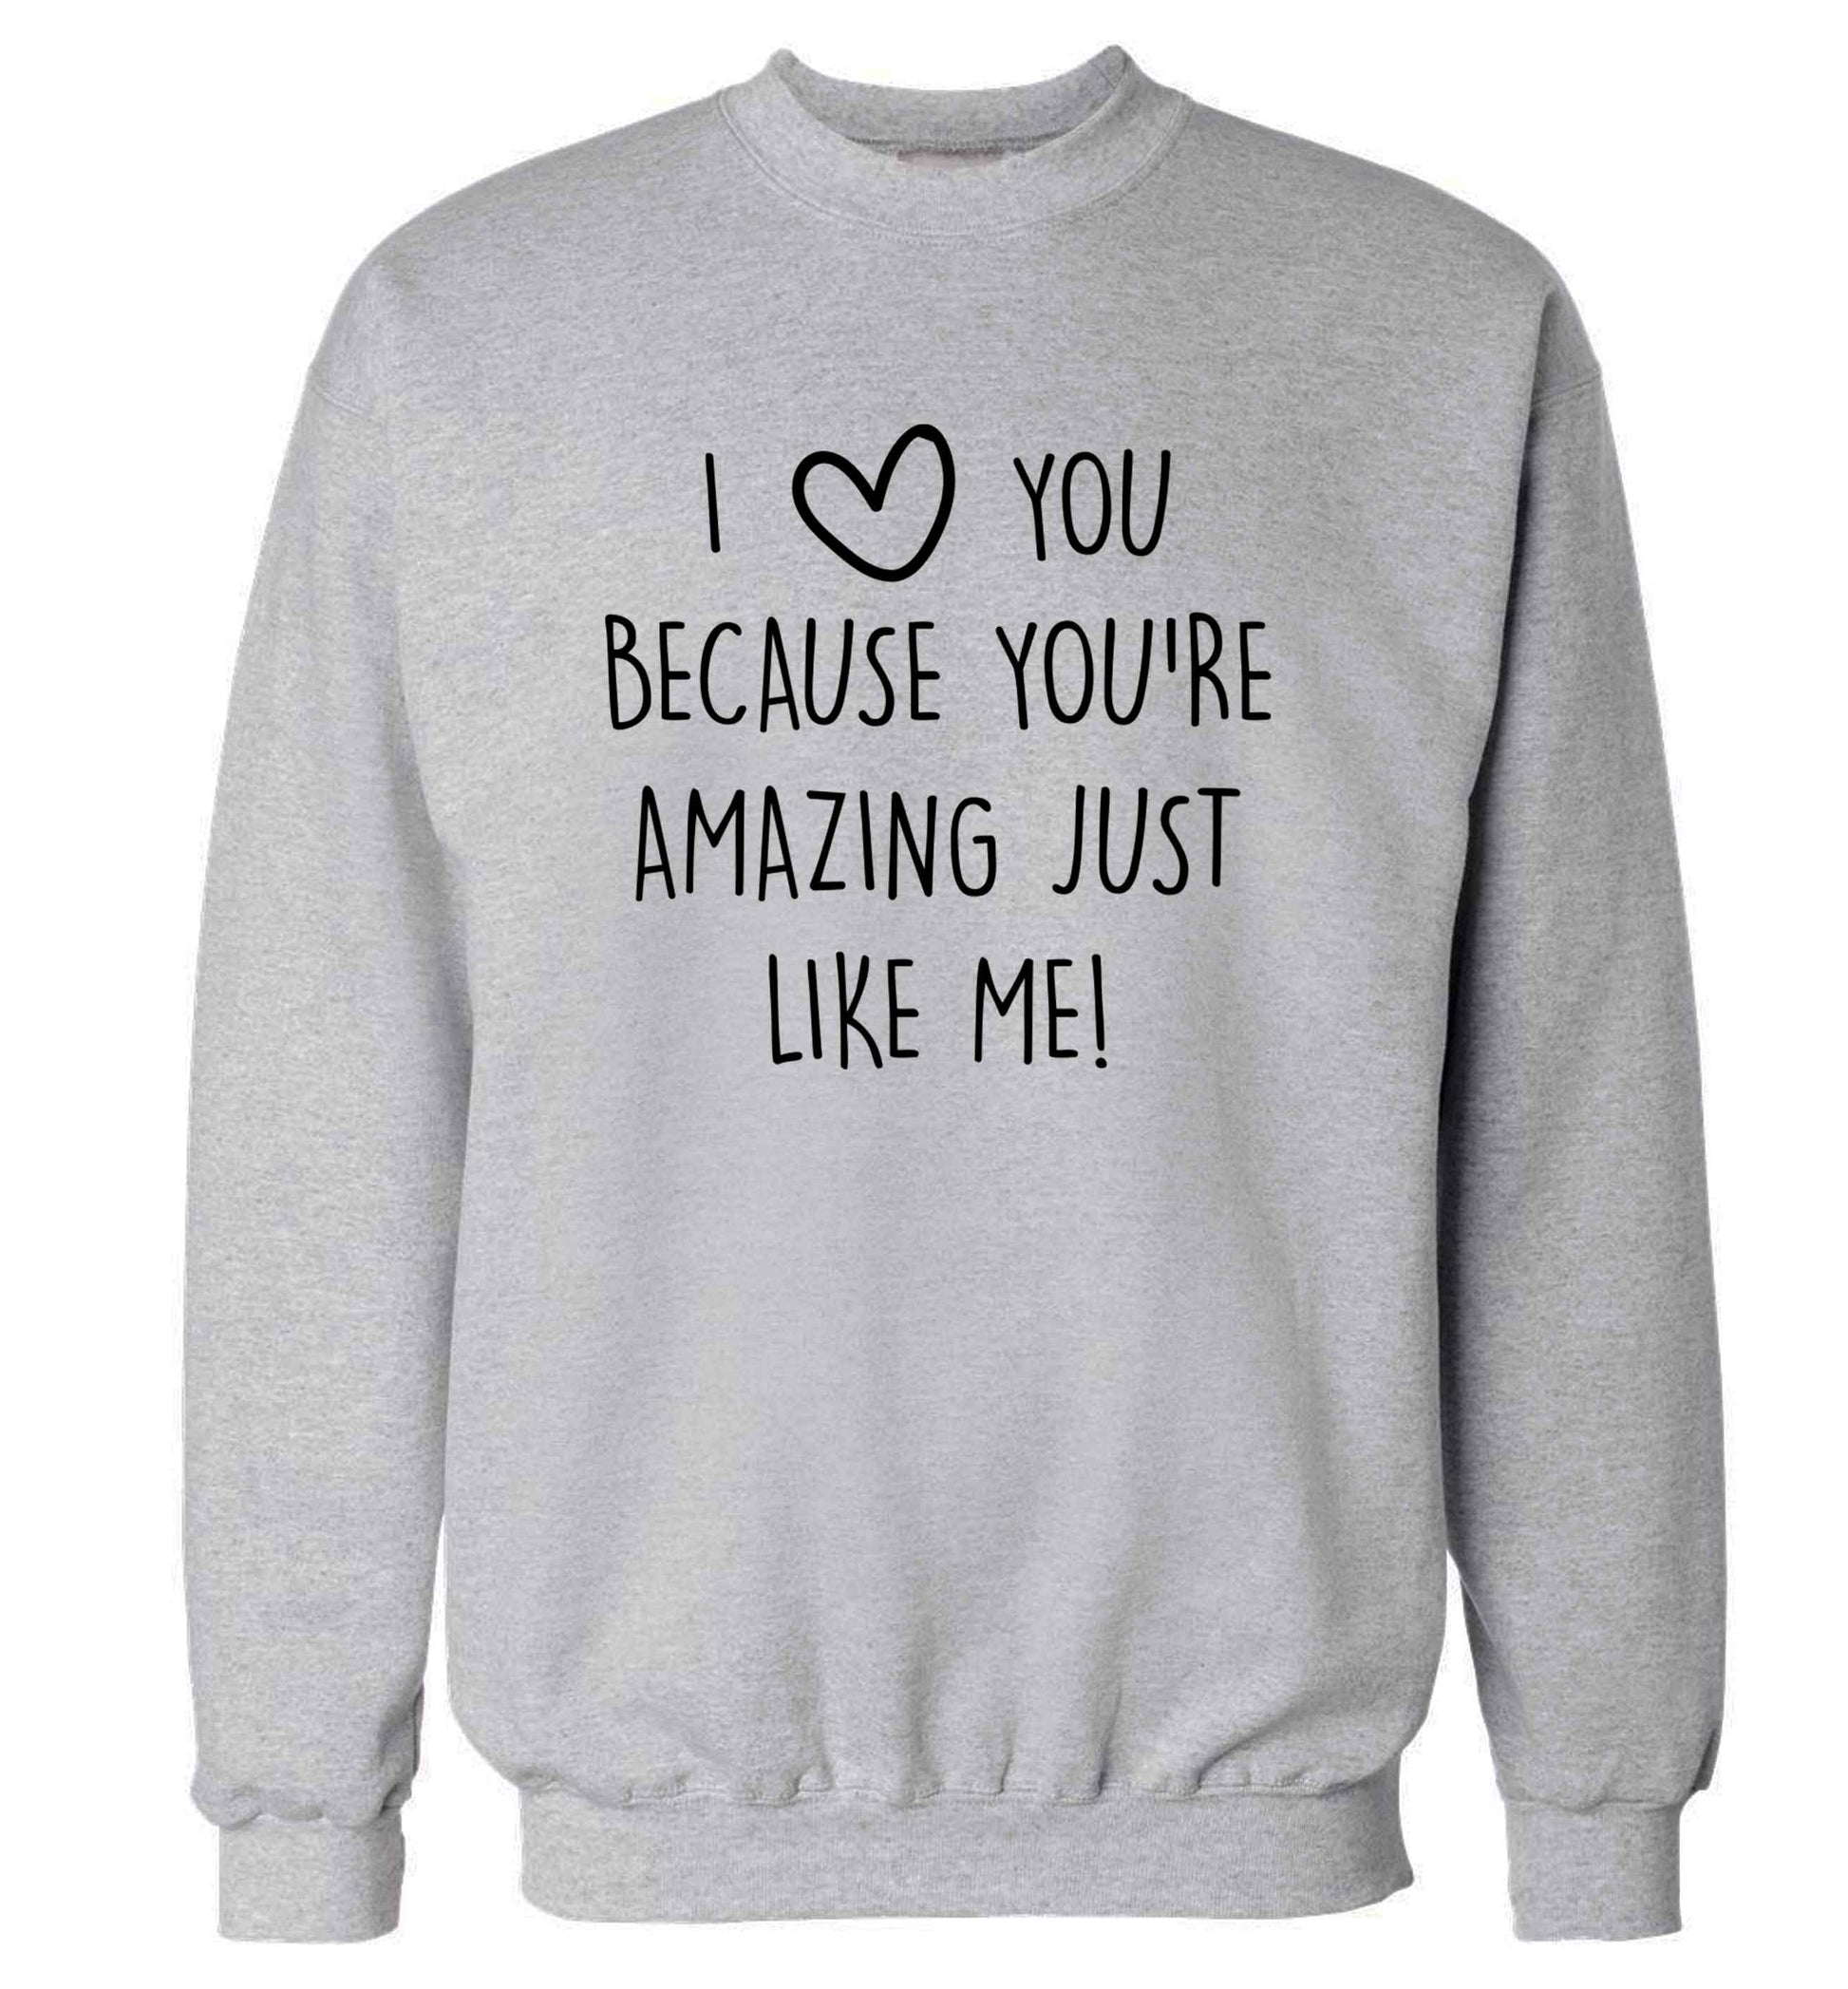 I love you because you're amazing just like me adult's unisex grey sweater 2XL